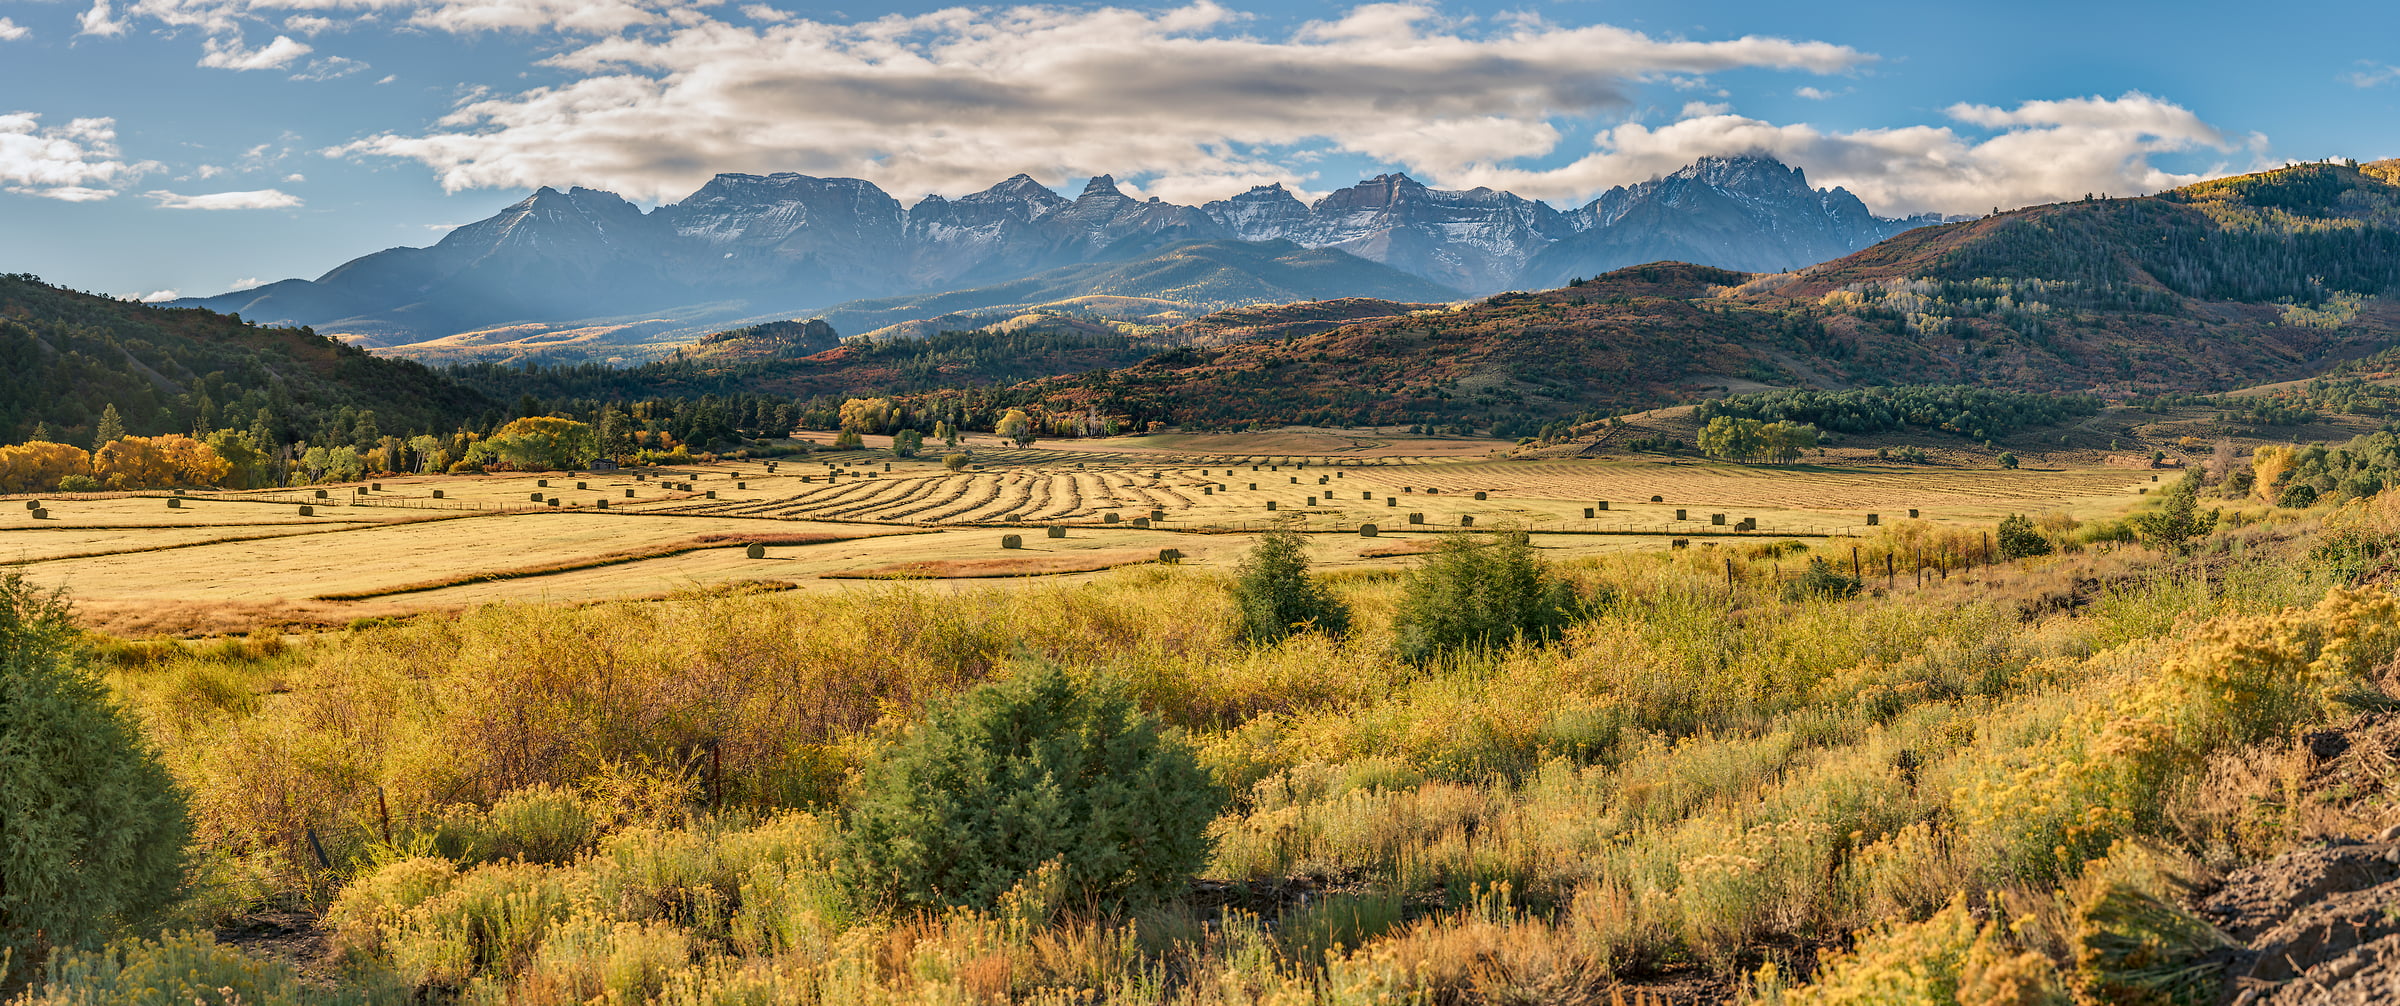 412 megapixels! A very high resolution, large-format VAST photo print of a field and mountain range; landscape photograph created by John Freeman in Last Dollar Road, Ridgway, Colorado